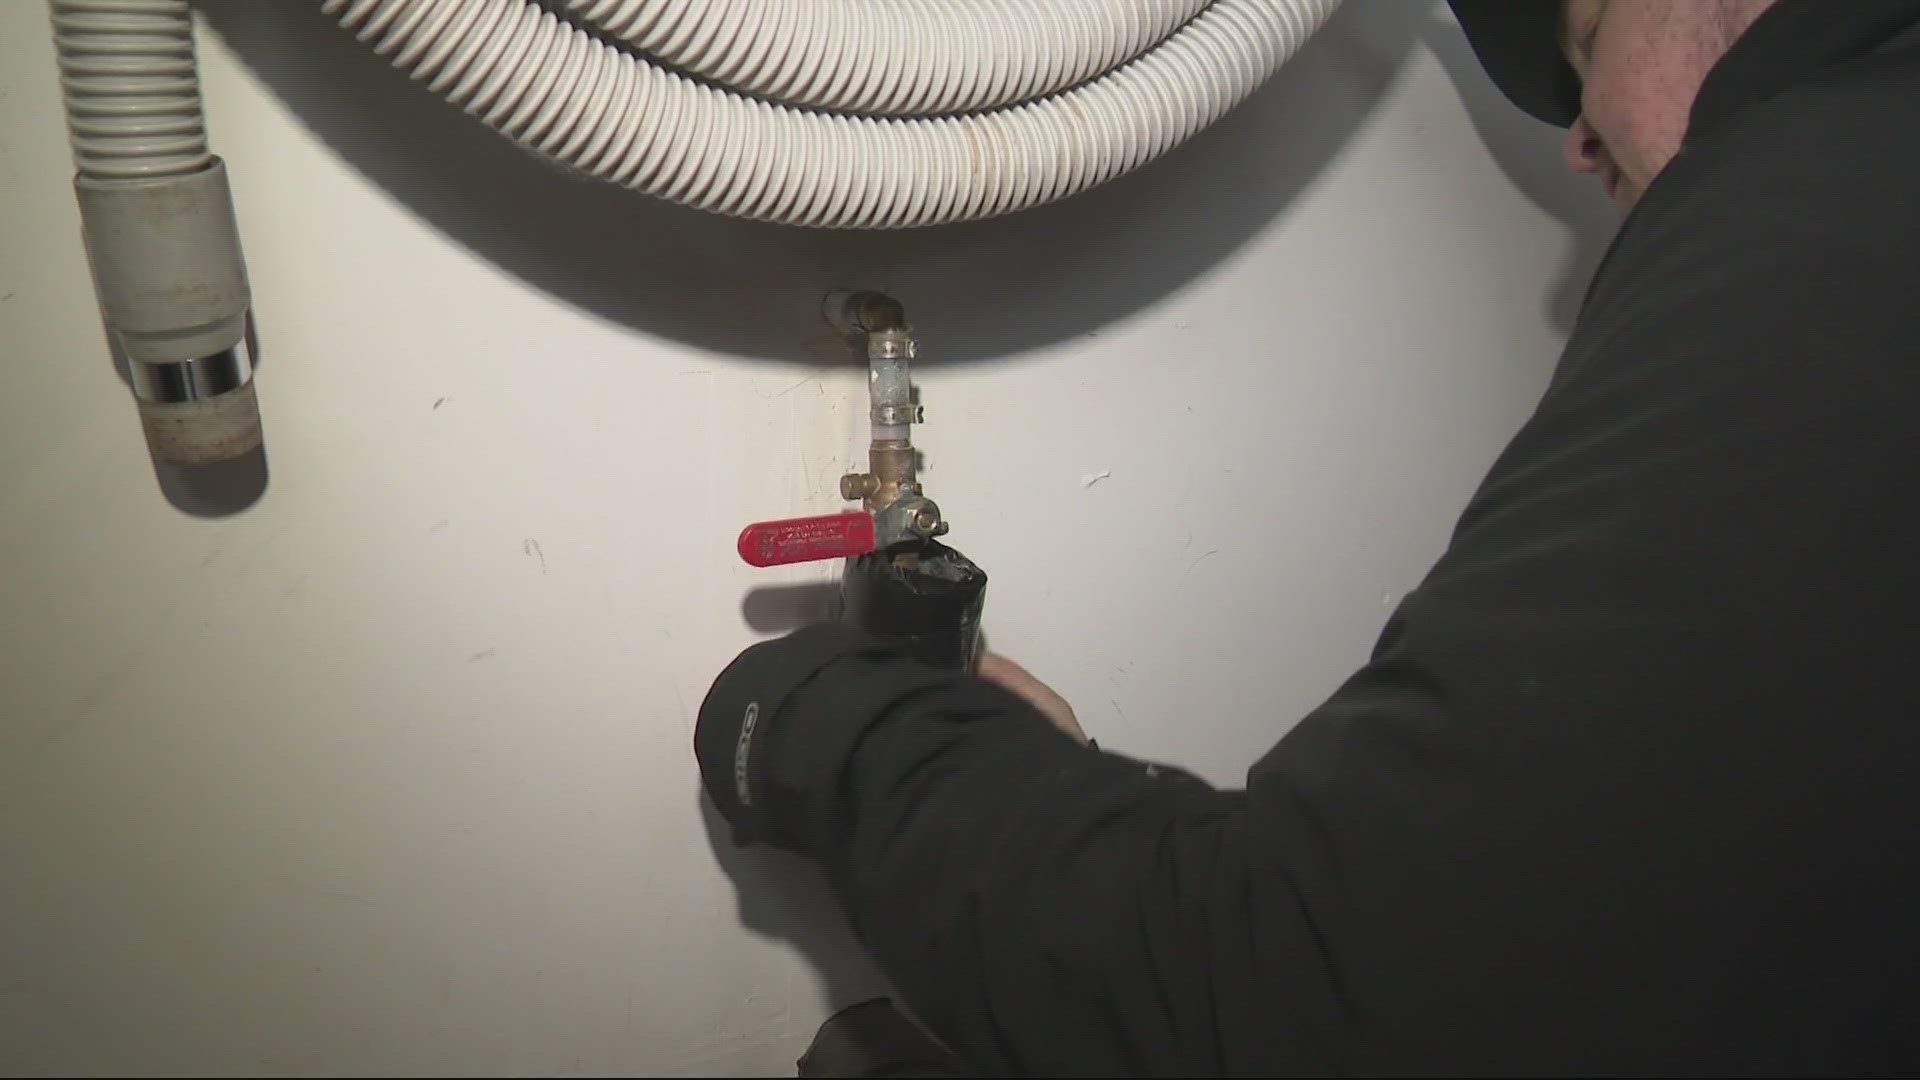 How to prevent burst pipes in freezing weather